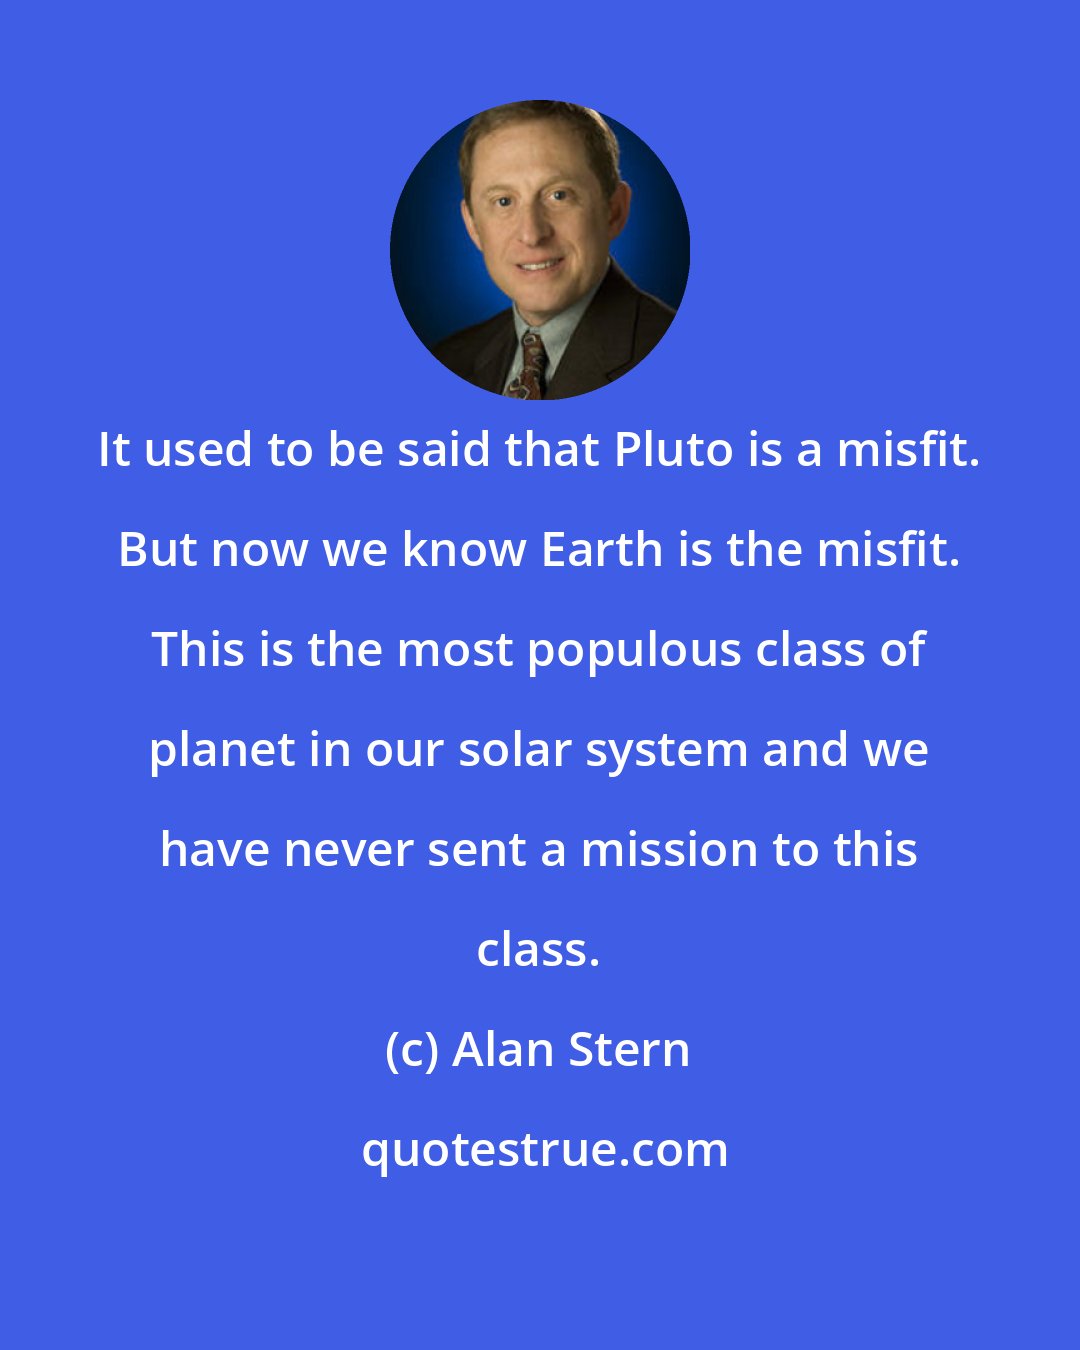 Alan Stern: It used to be said that Pluto is a misfit. But now we know Earth is the misfit. This is the most populous class of planet in our solar system and we have never sent a mission to this class.